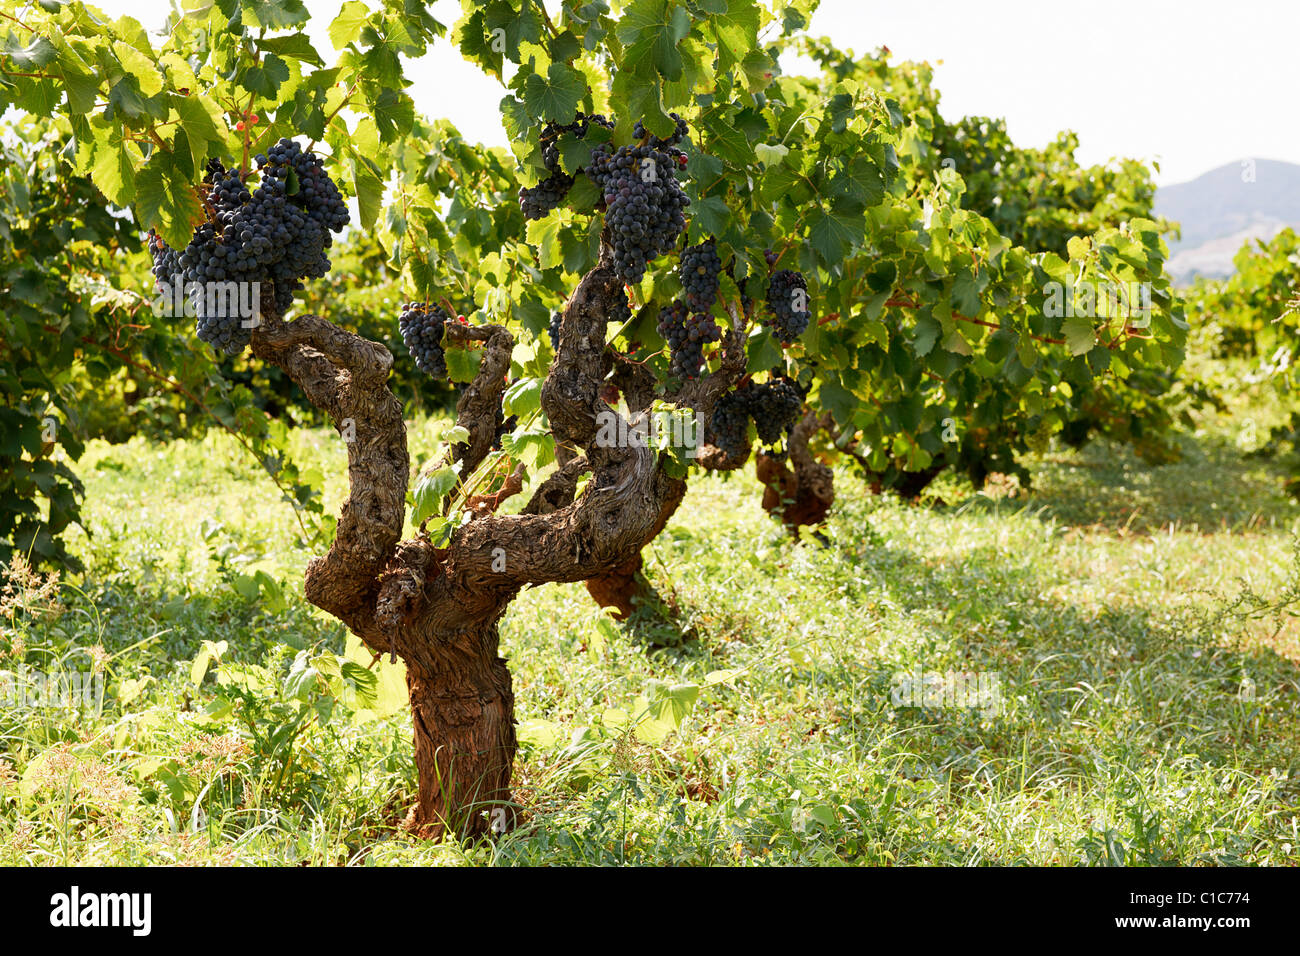 Grapes on a vine in a vineyard Stock Photo